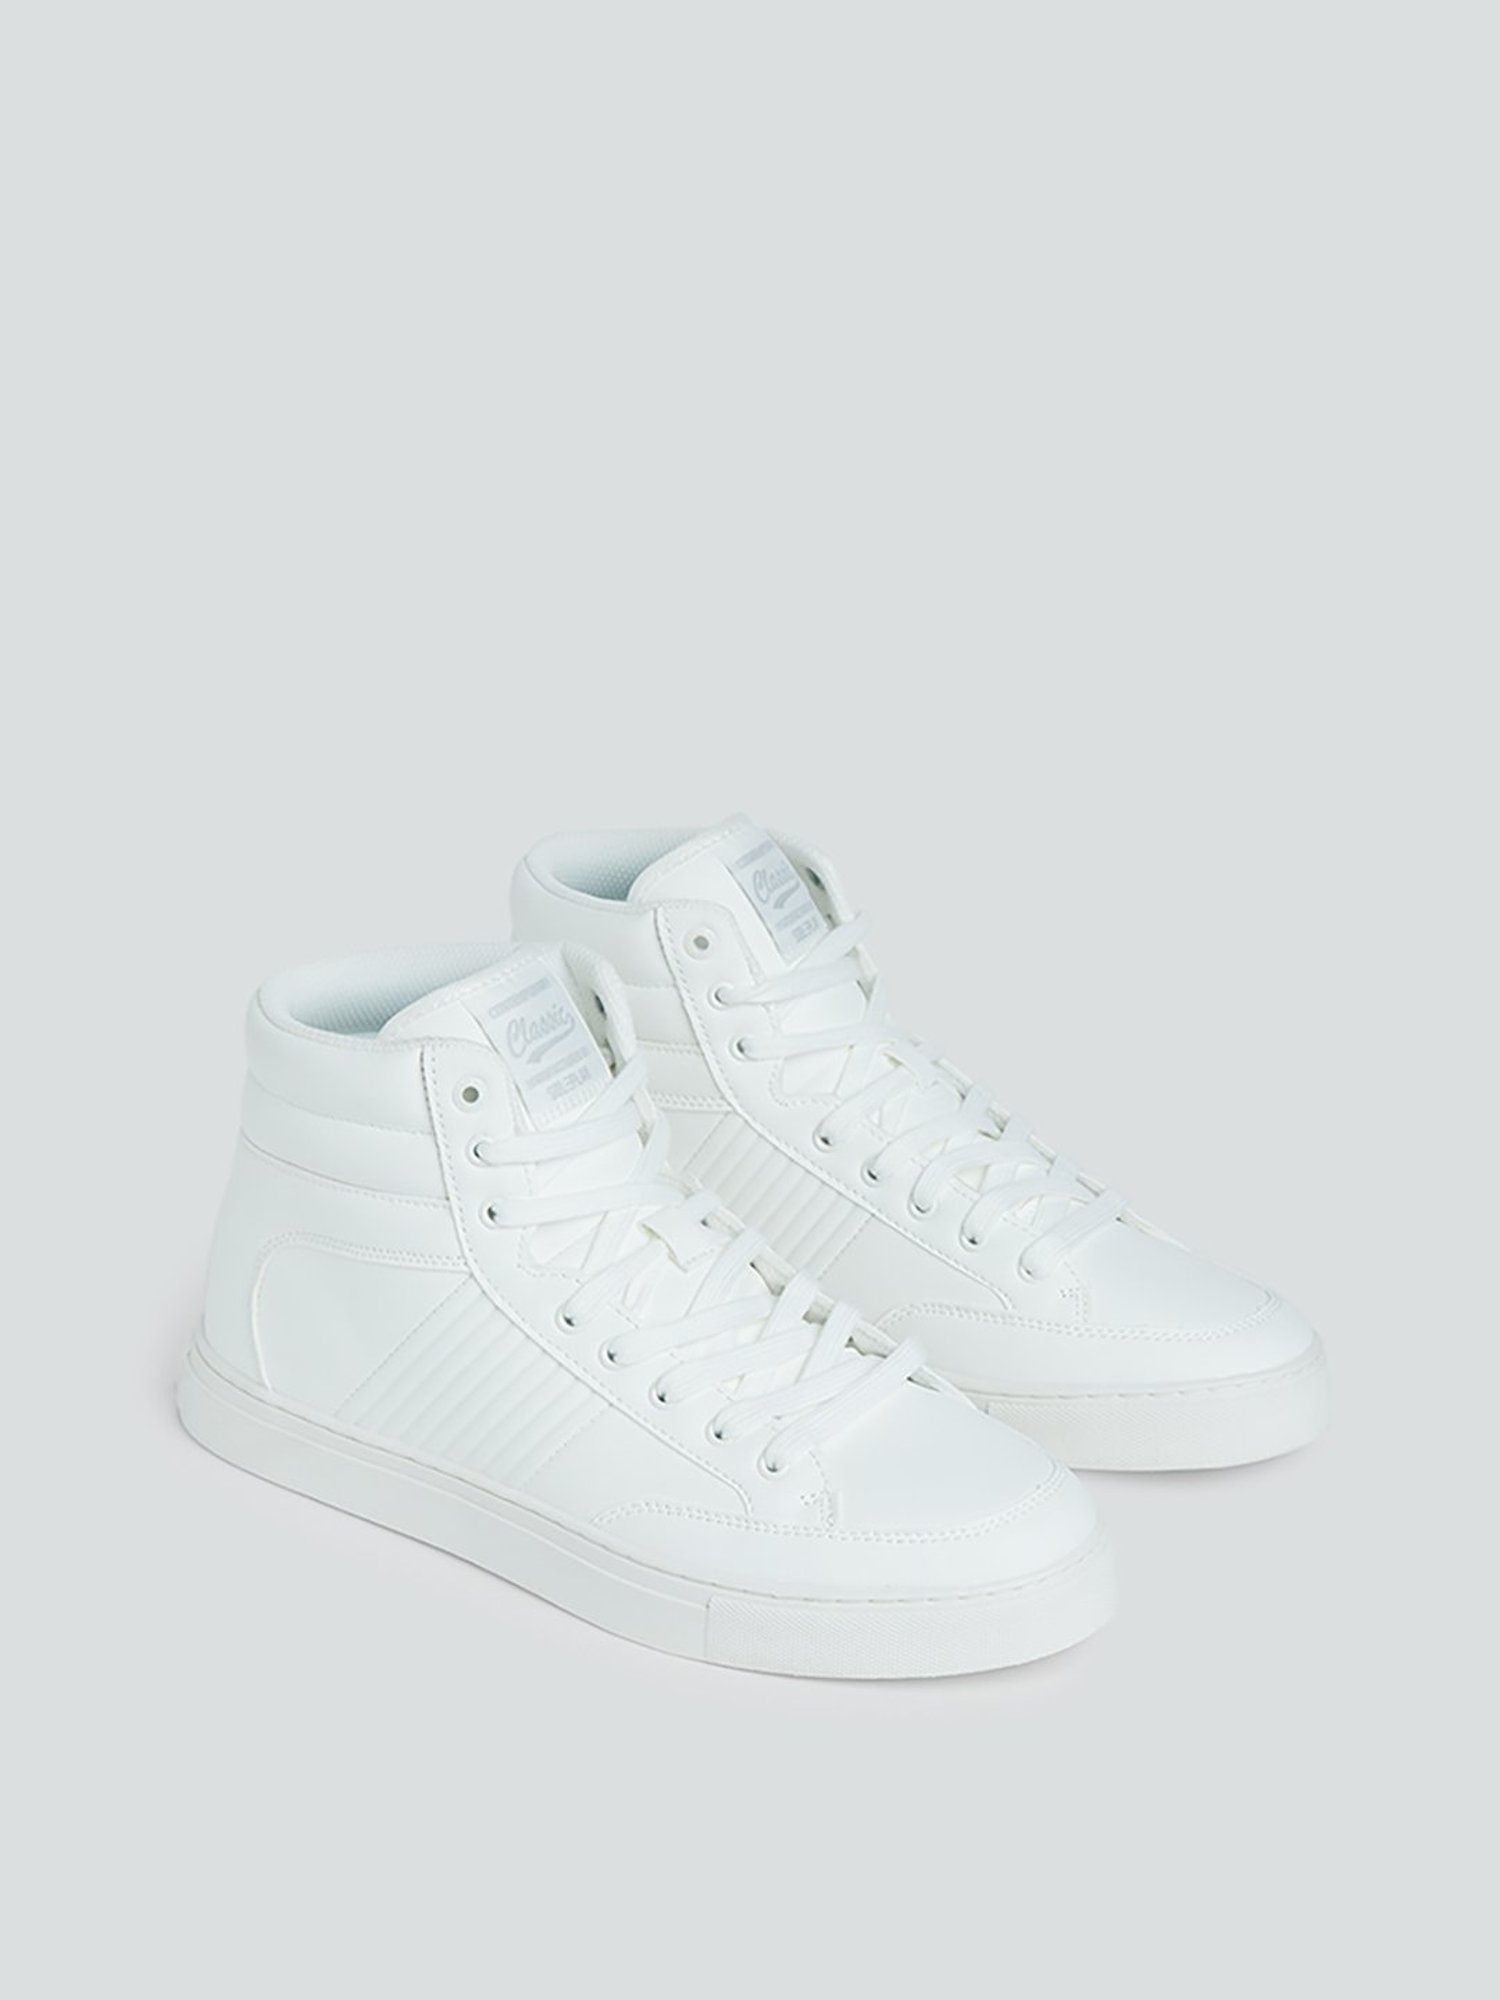 SOLEPLAY White Lace-Up Sneakers, White / EURO-44